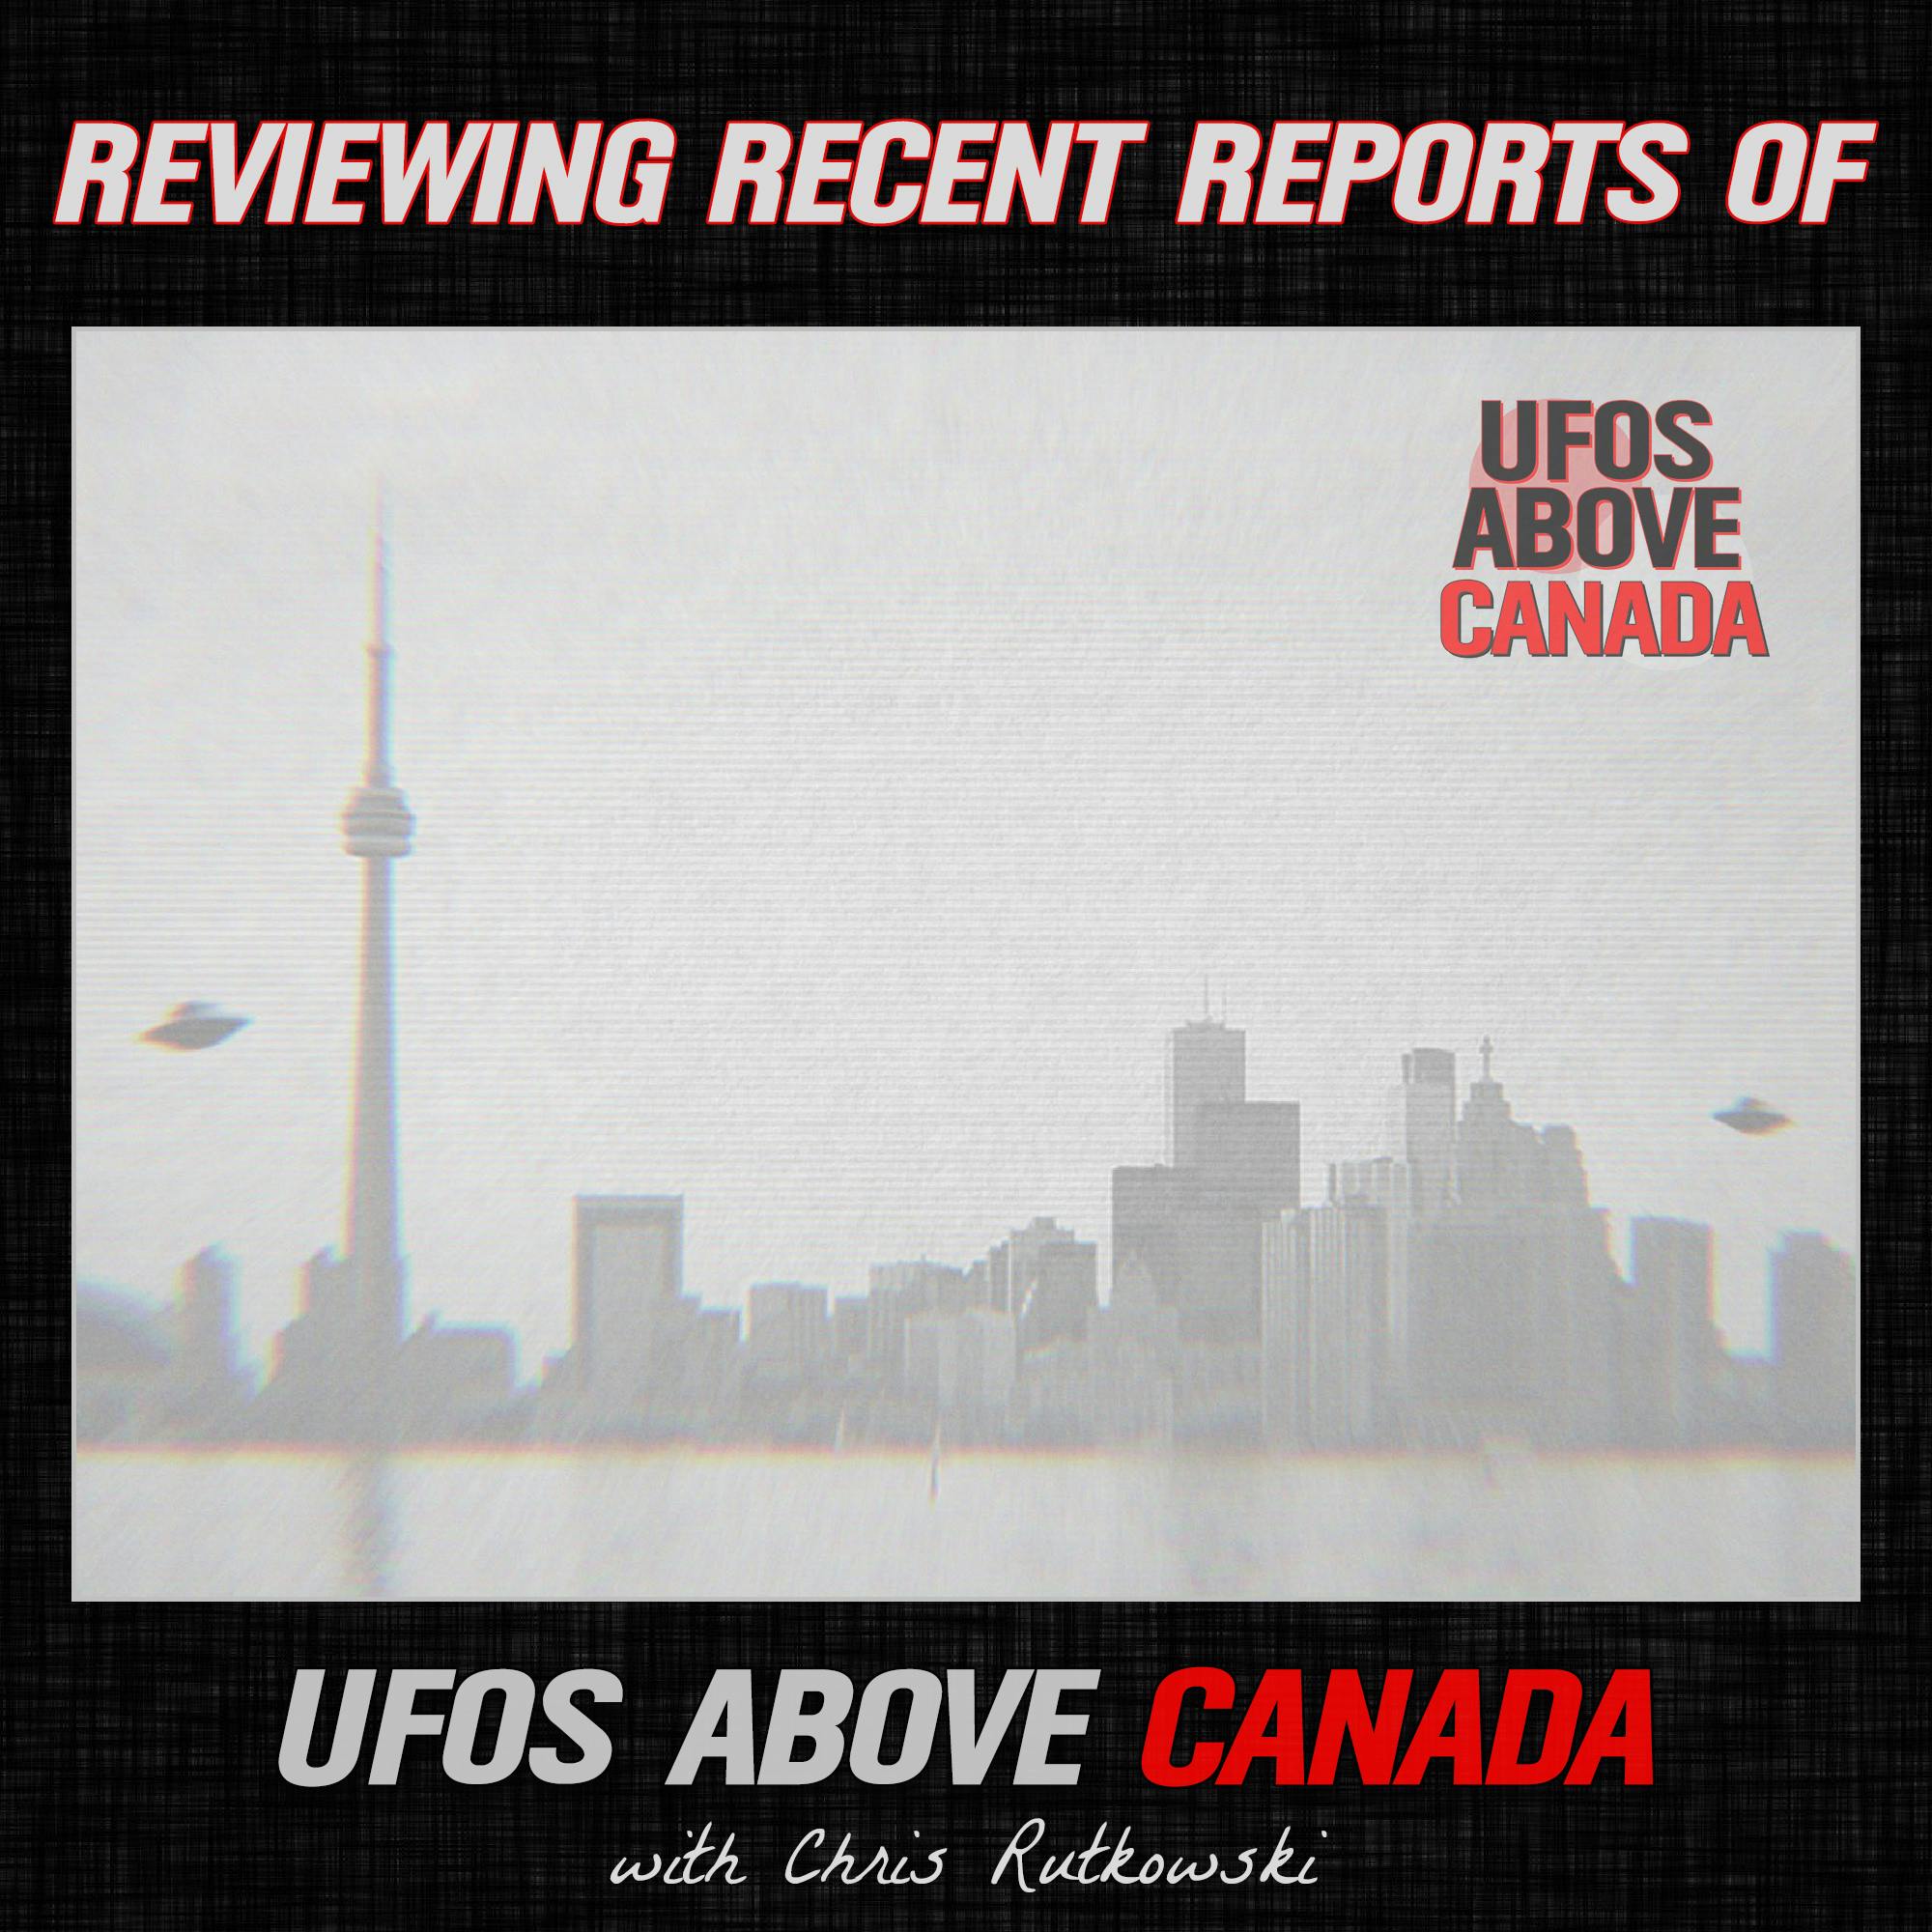 UFOs ABOVE CANADA - reviewing reports of UFOs above Canada with Chris Rutkowski